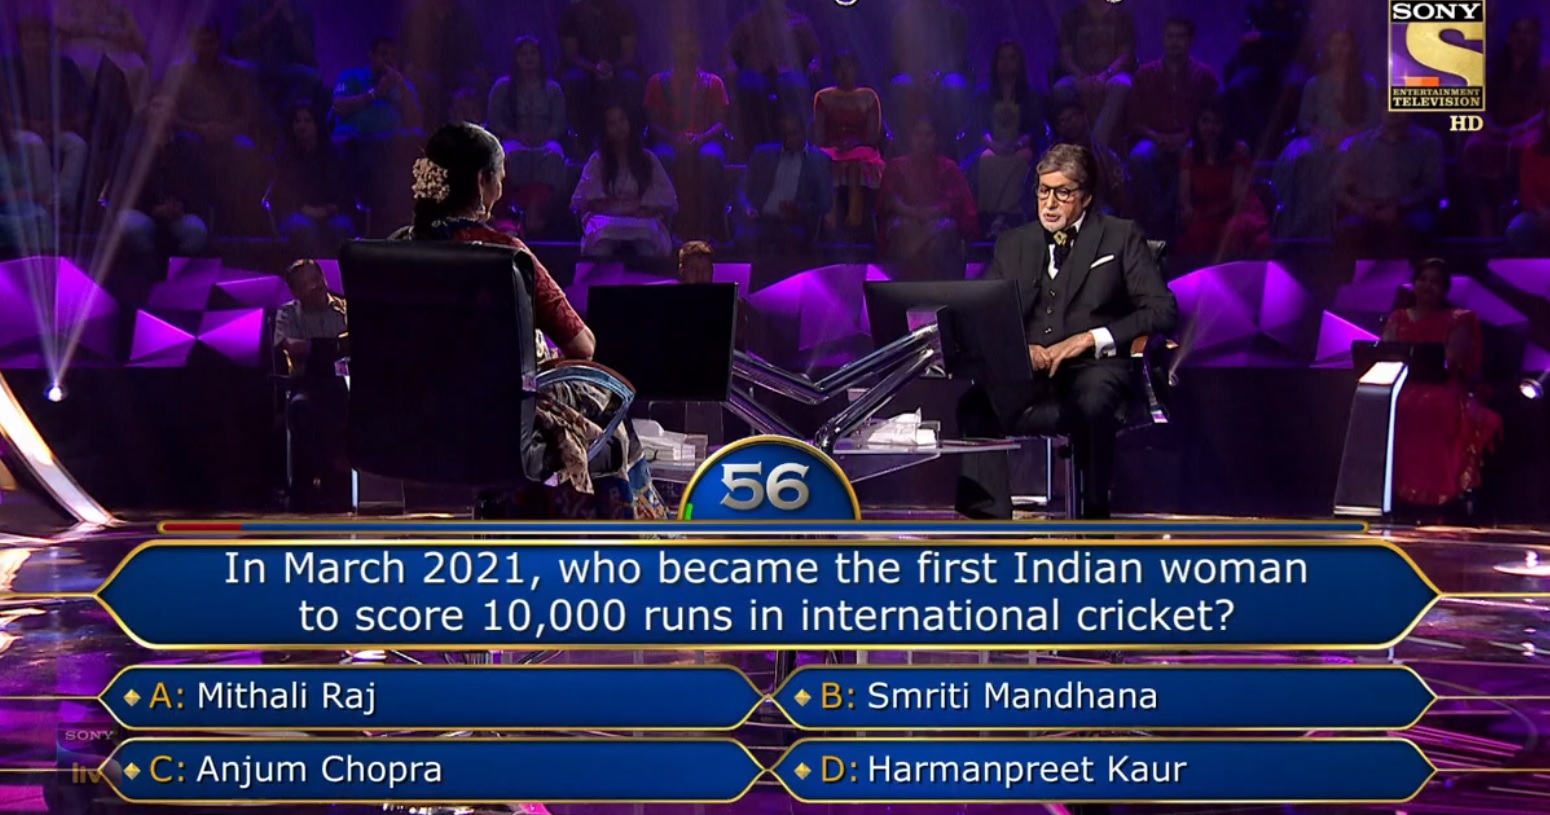 Ques : In March 2021, who became the first Indian woman to score 10,000 runs in international cricket?